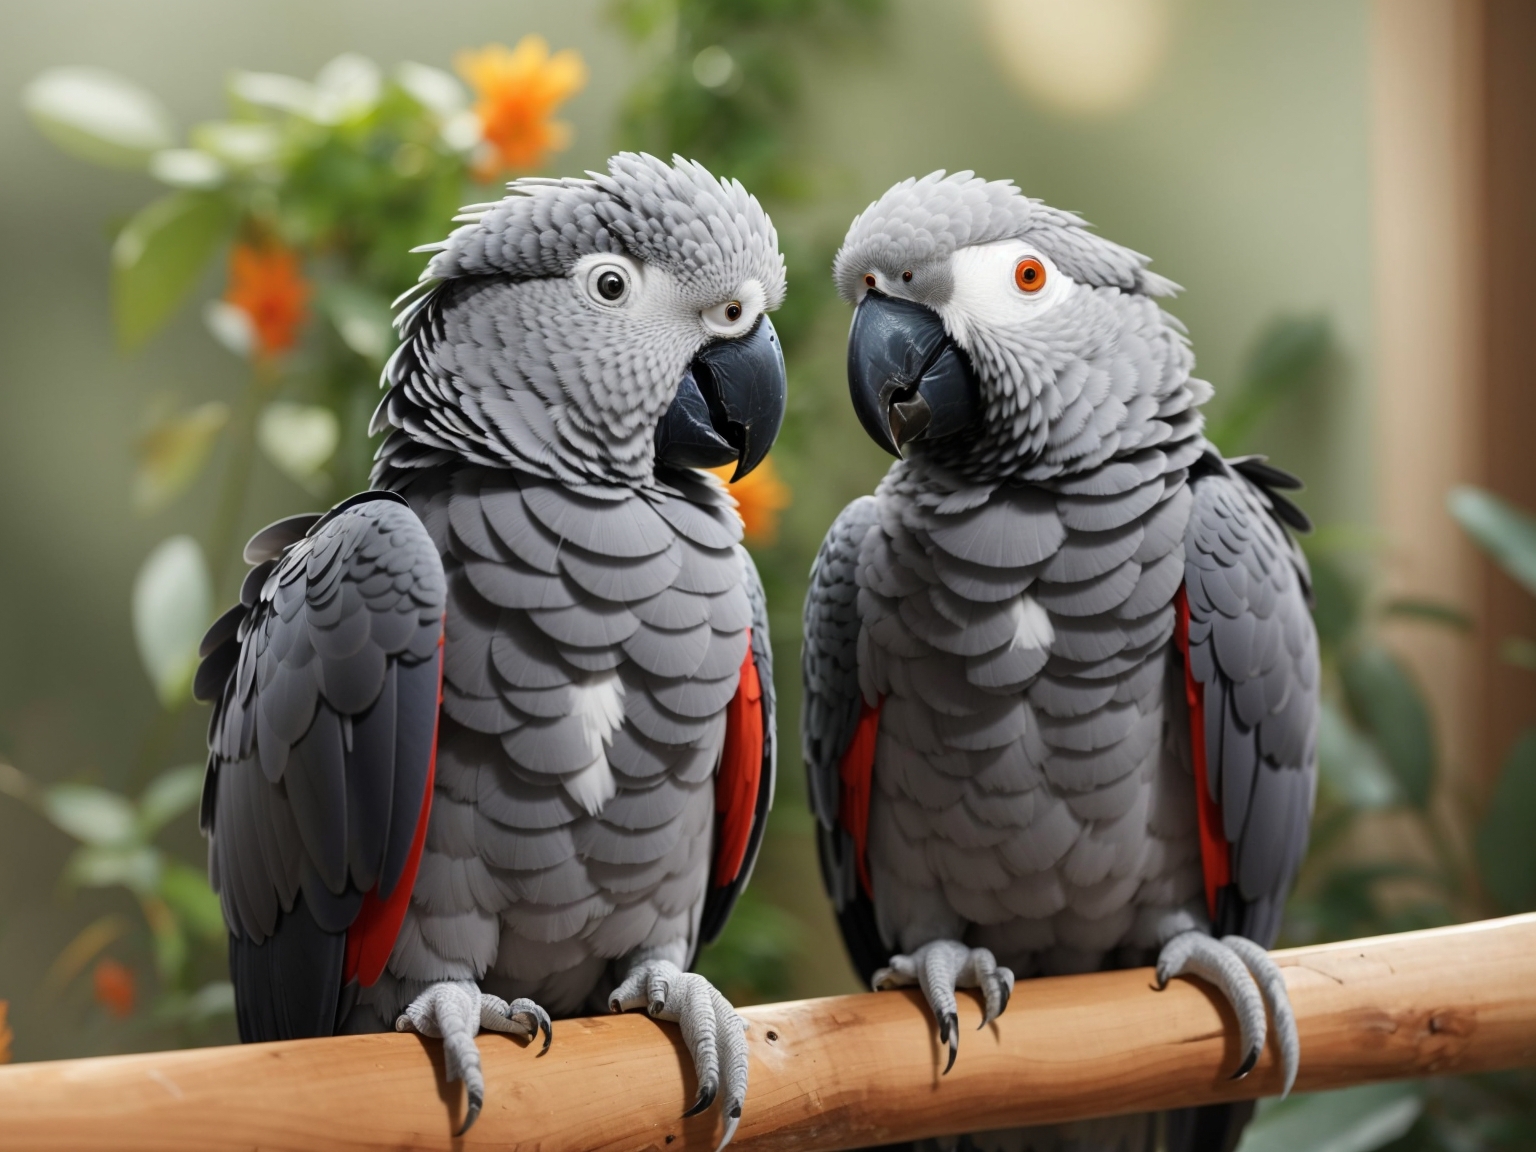 Yes, African grey parrot.